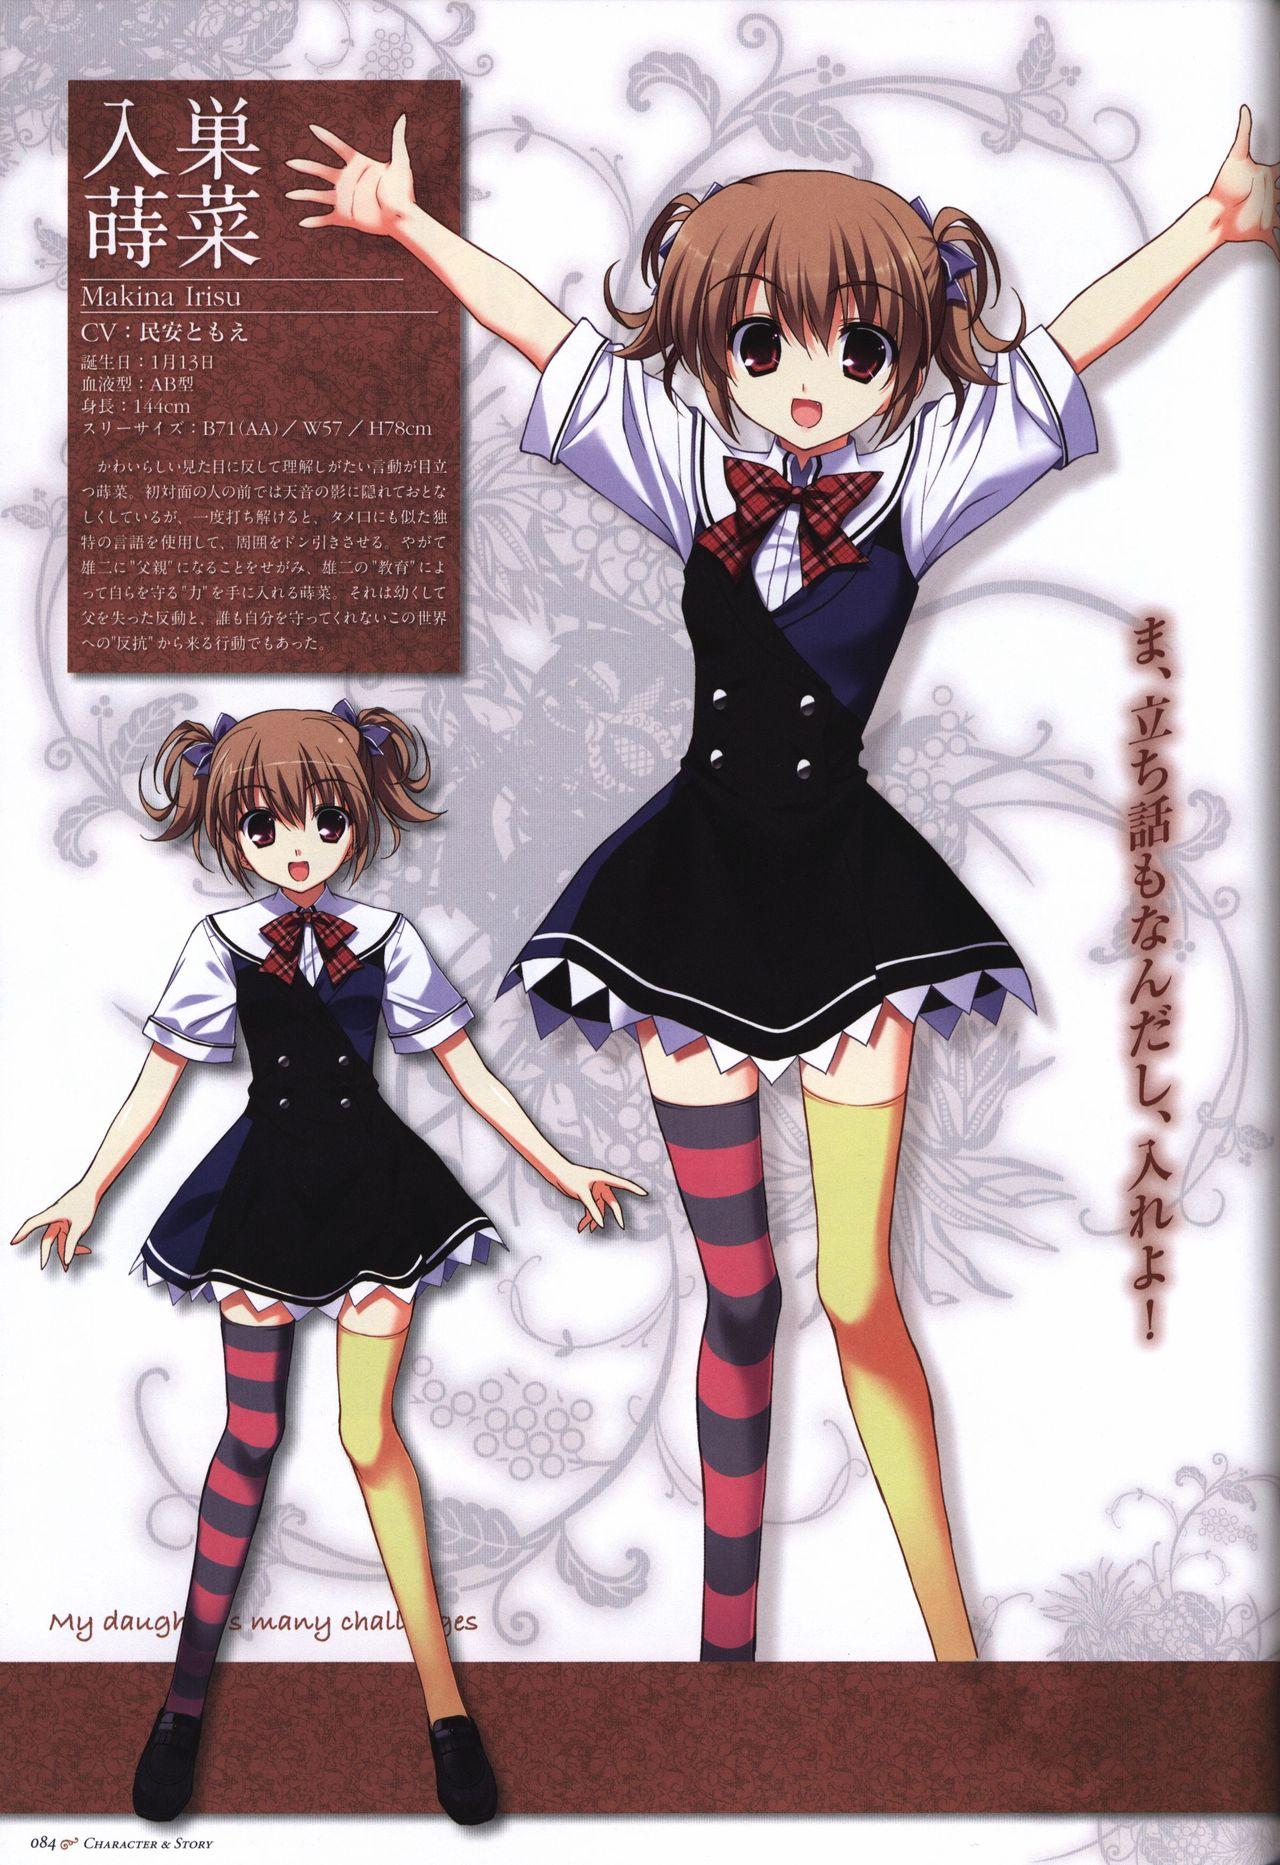 The Fruit of Grisaia Visual FanBook 84